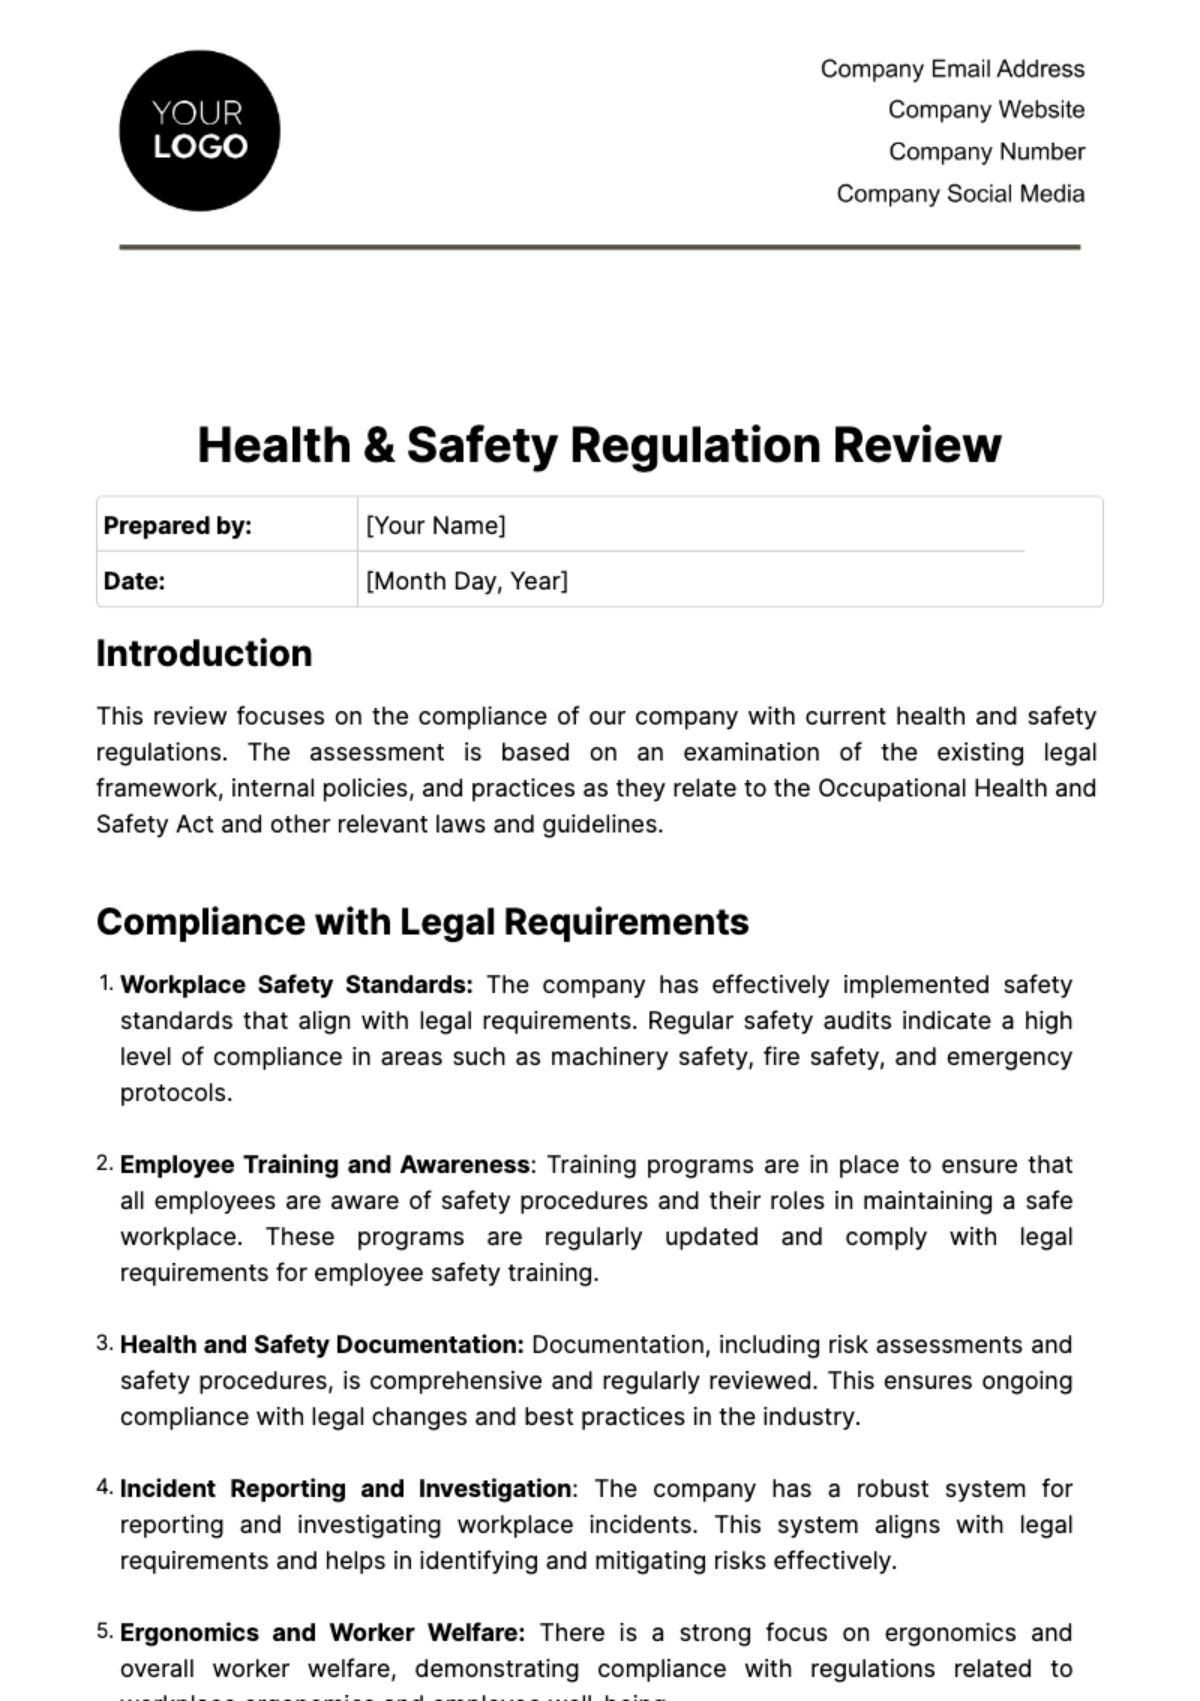 Free Health & Safety Regulation Review Template